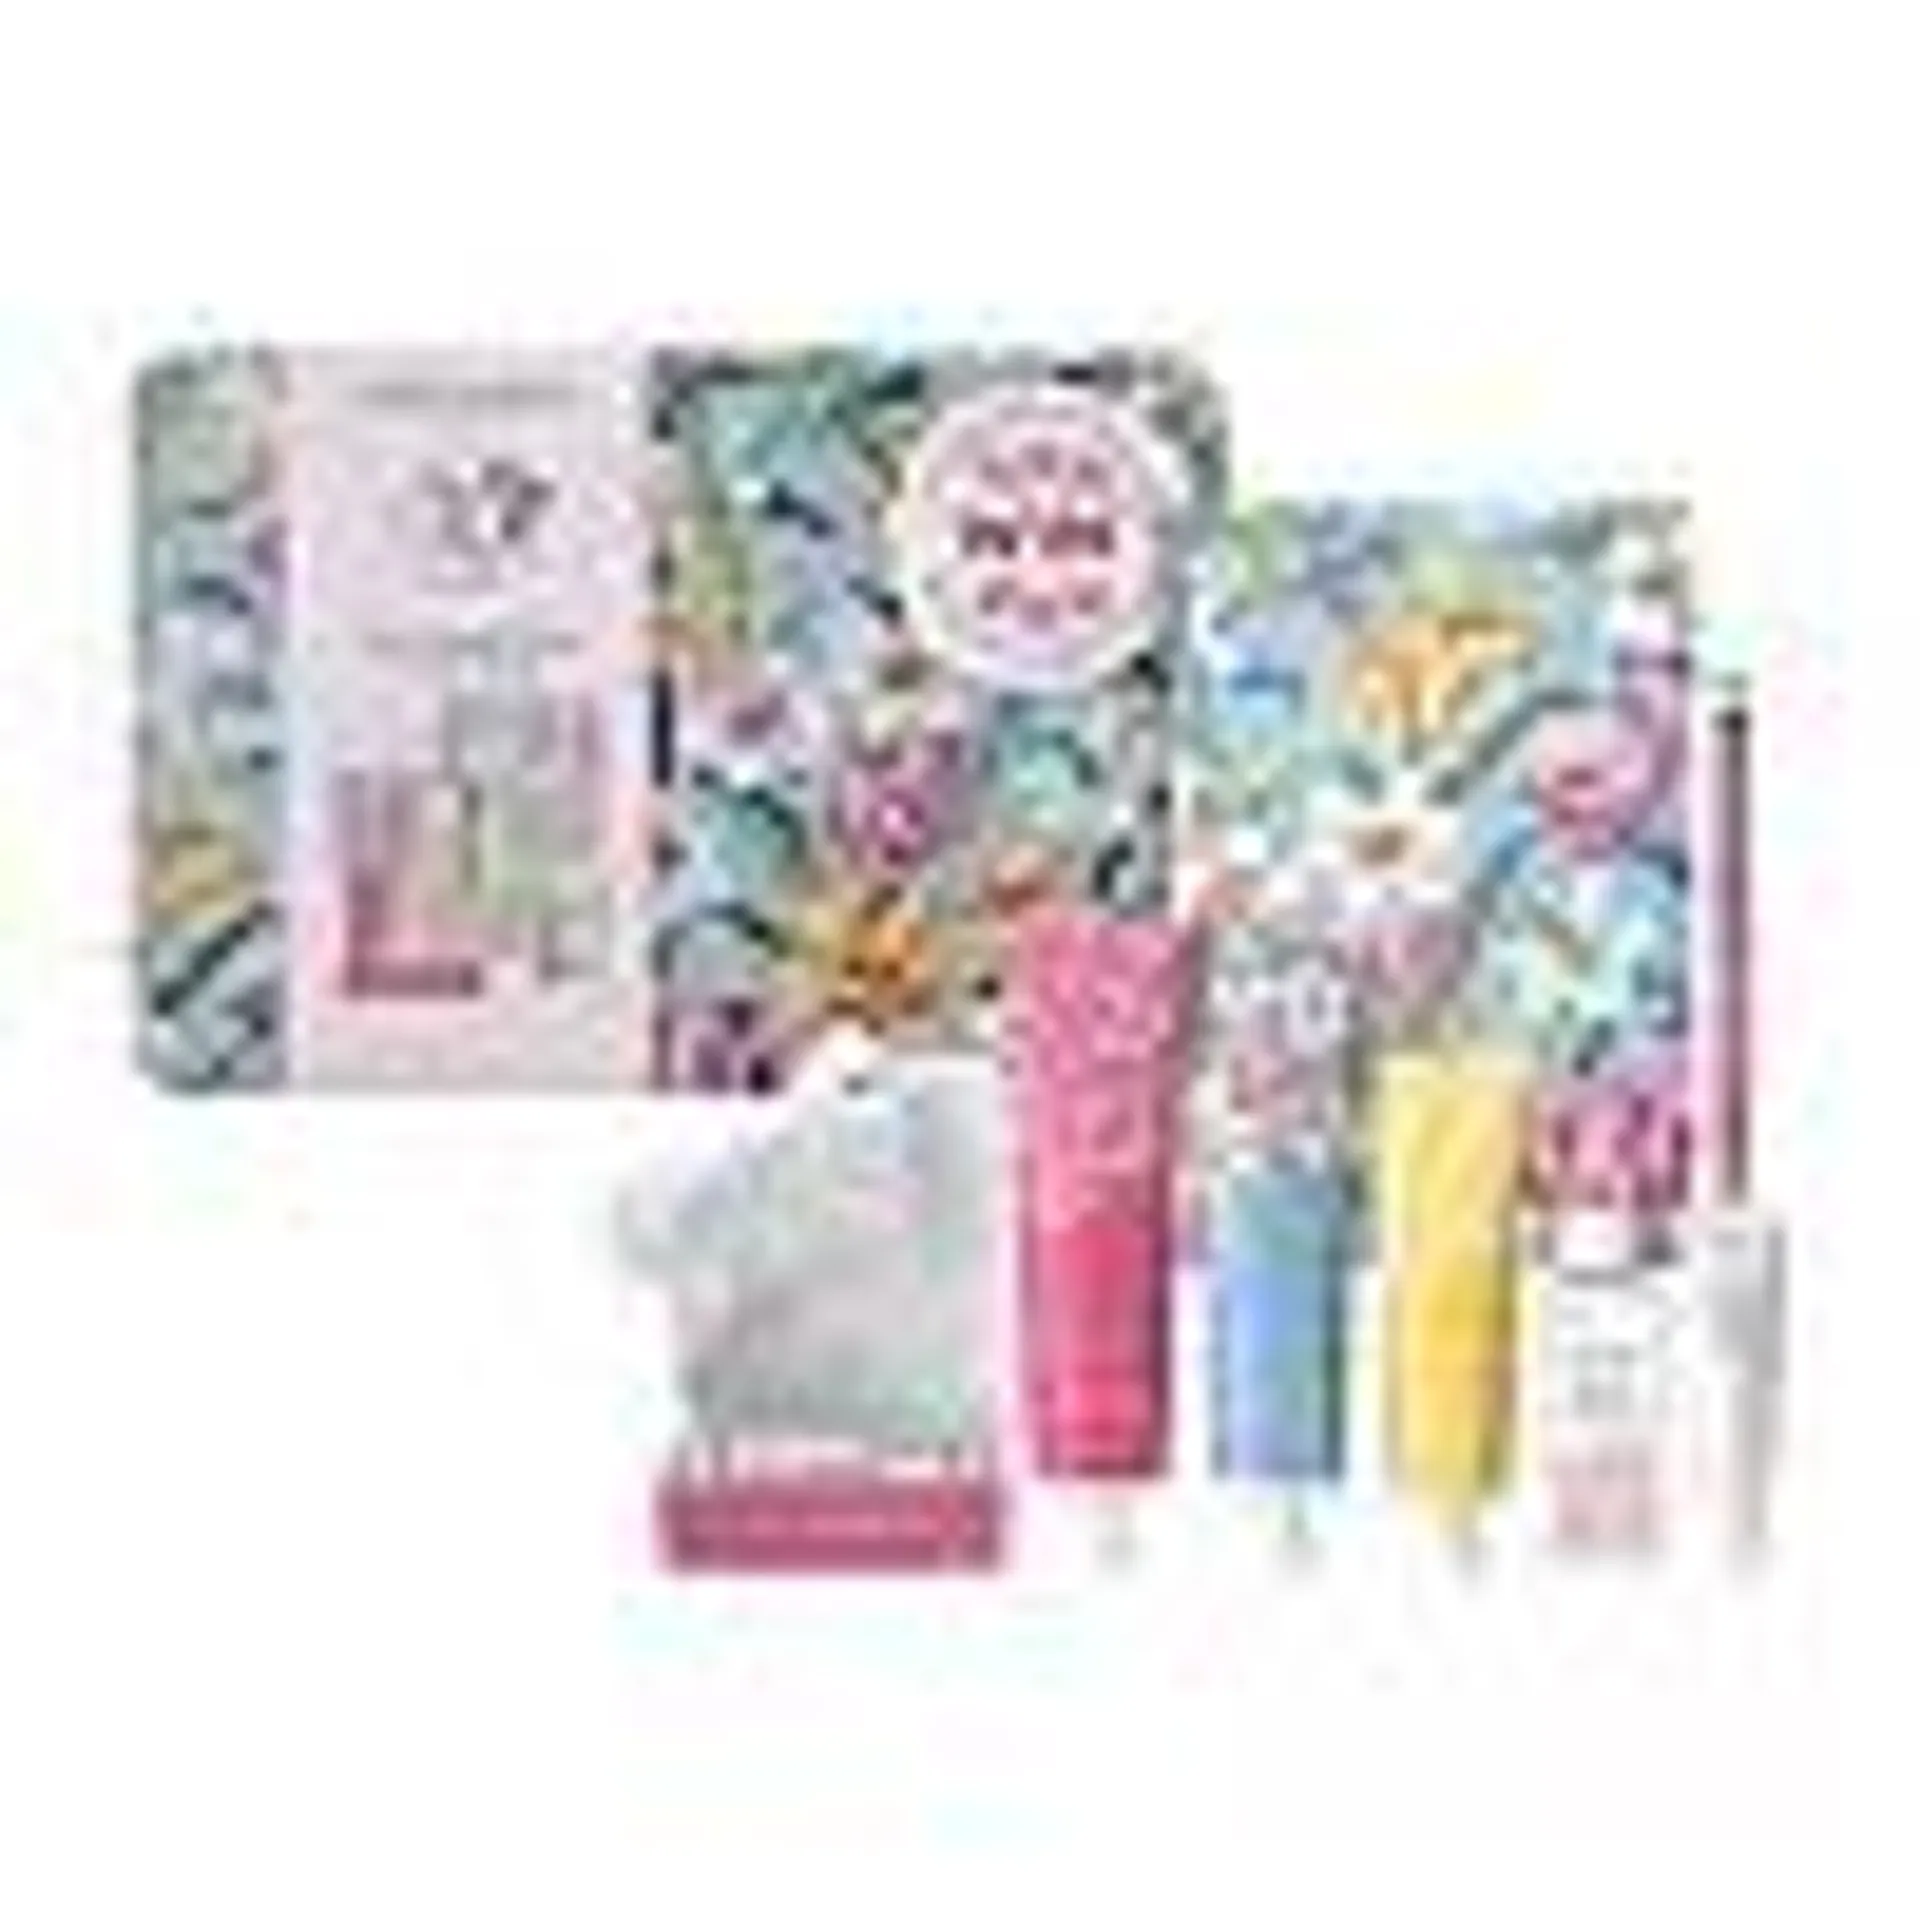 Laura Ashley Give Yourself Time Gift Set